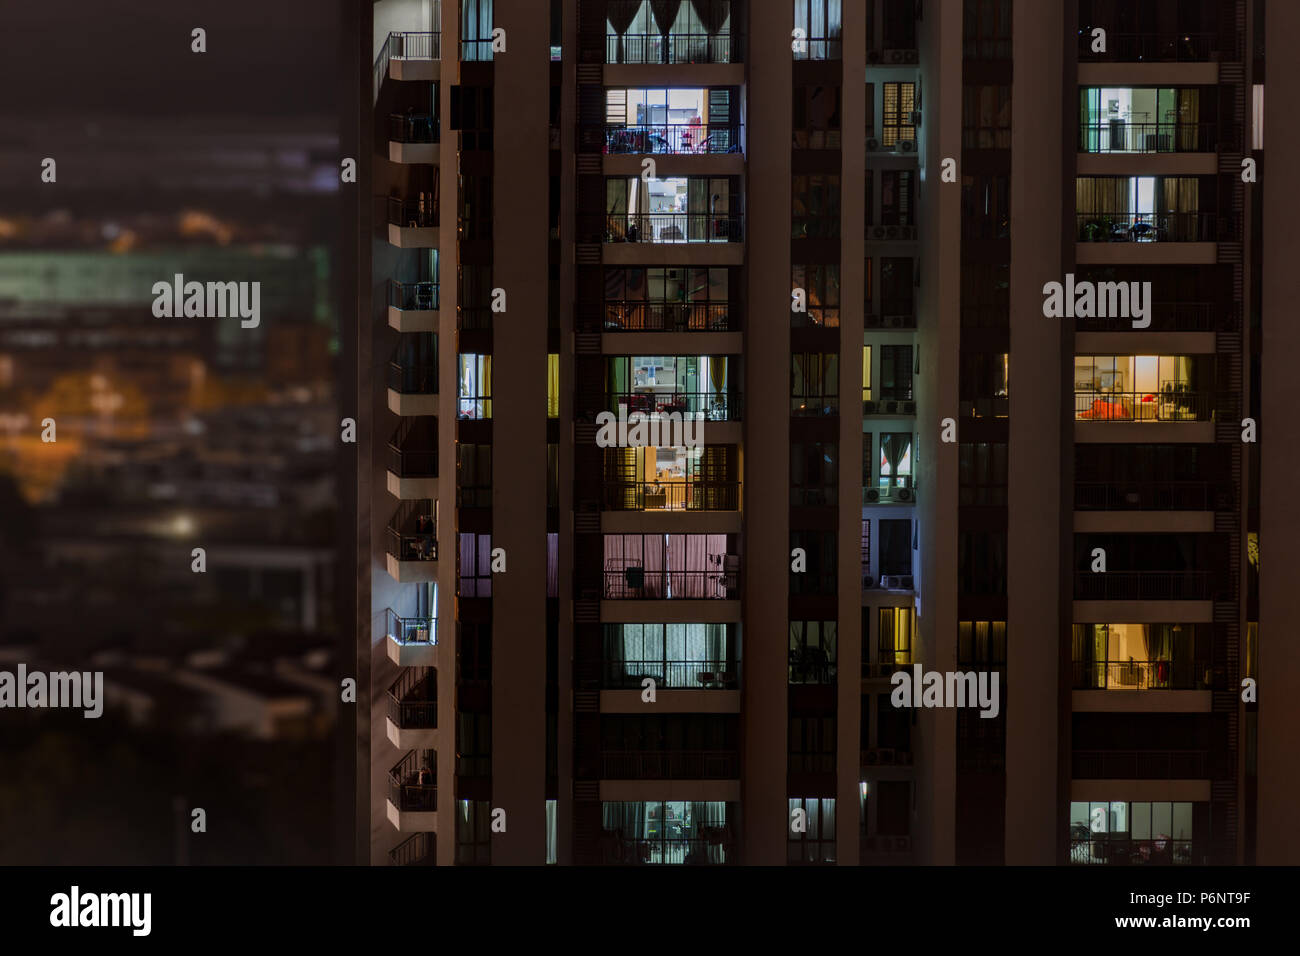 Background with night life in big city - modern high-rise building with windows of cozy apartments in which light shines, people doing routine things. Stock Photo